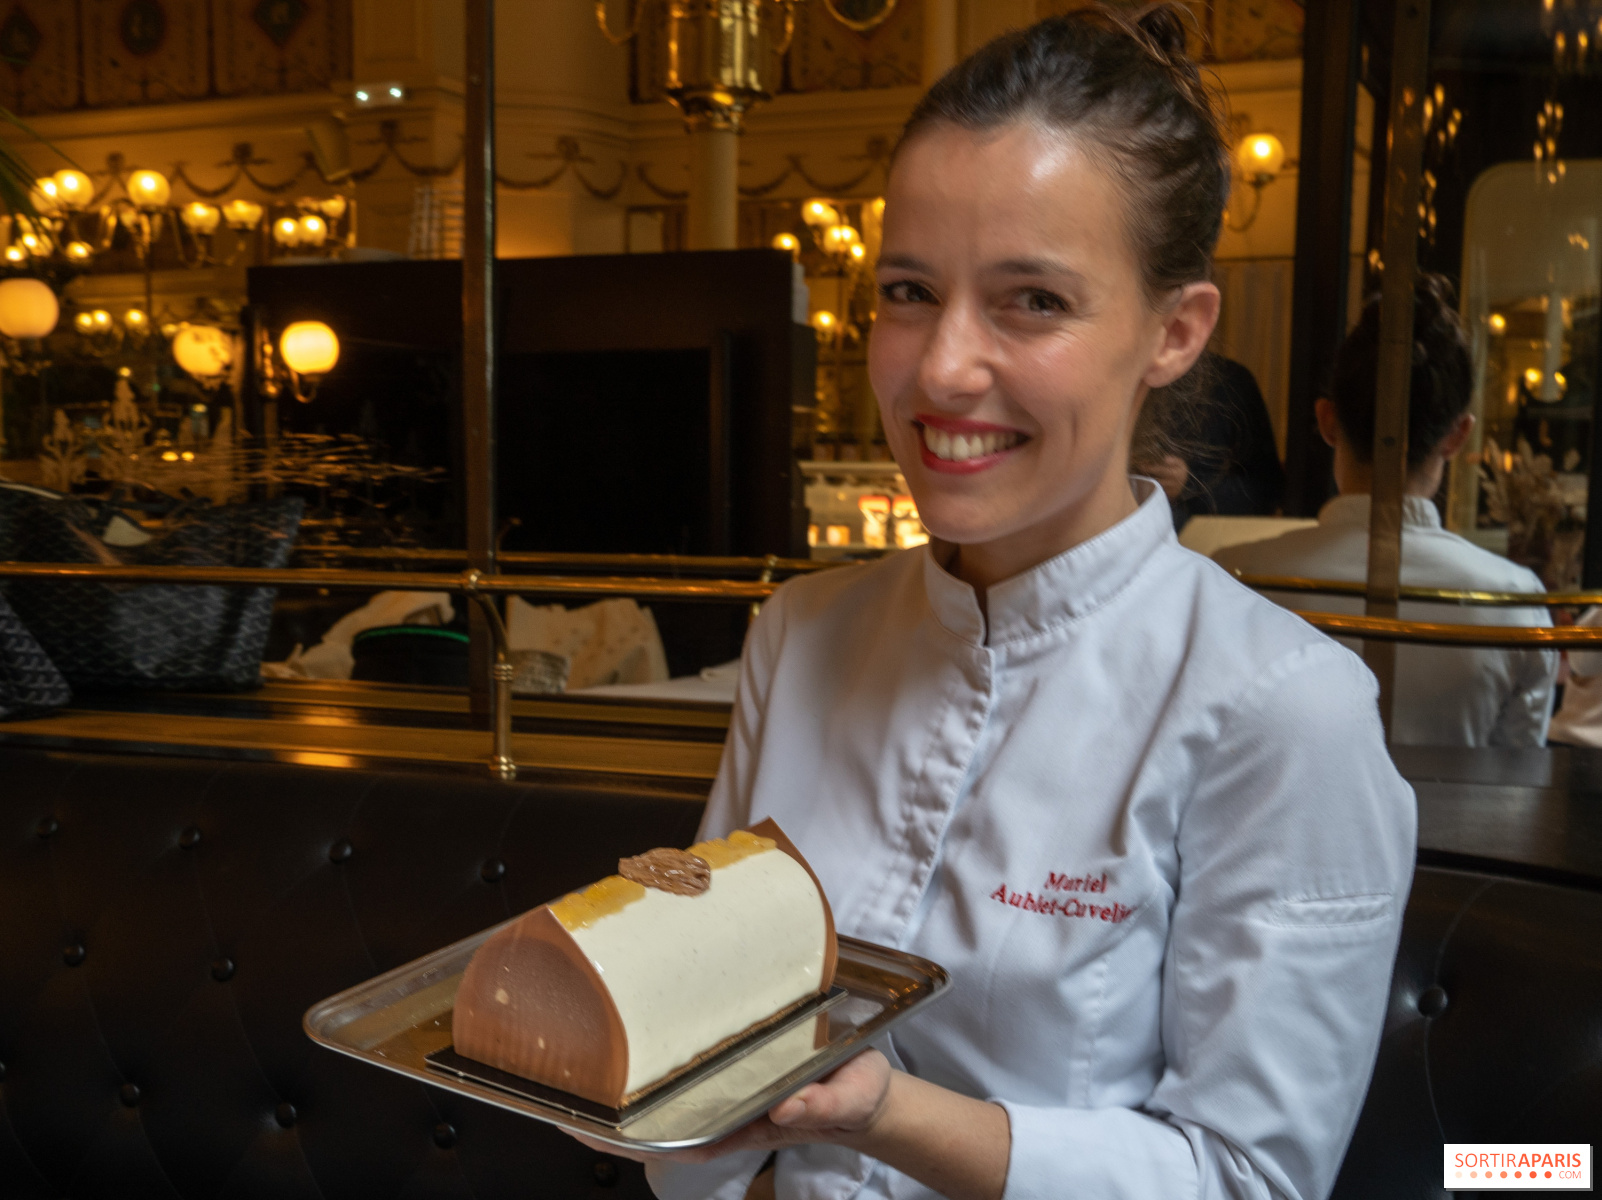 Les Secrets de Muriel's pastries available at the counter of Grand Colbert  